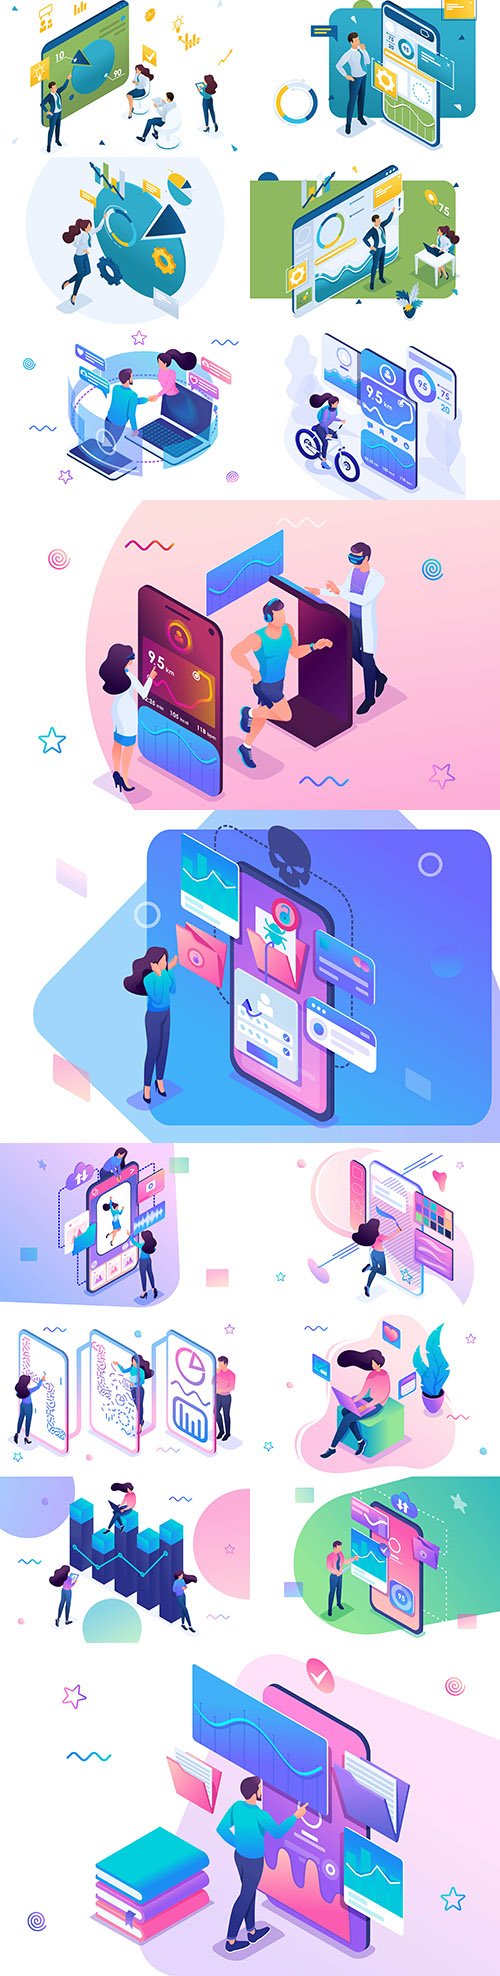 Social networks and app analysis 3d isometric illustrations